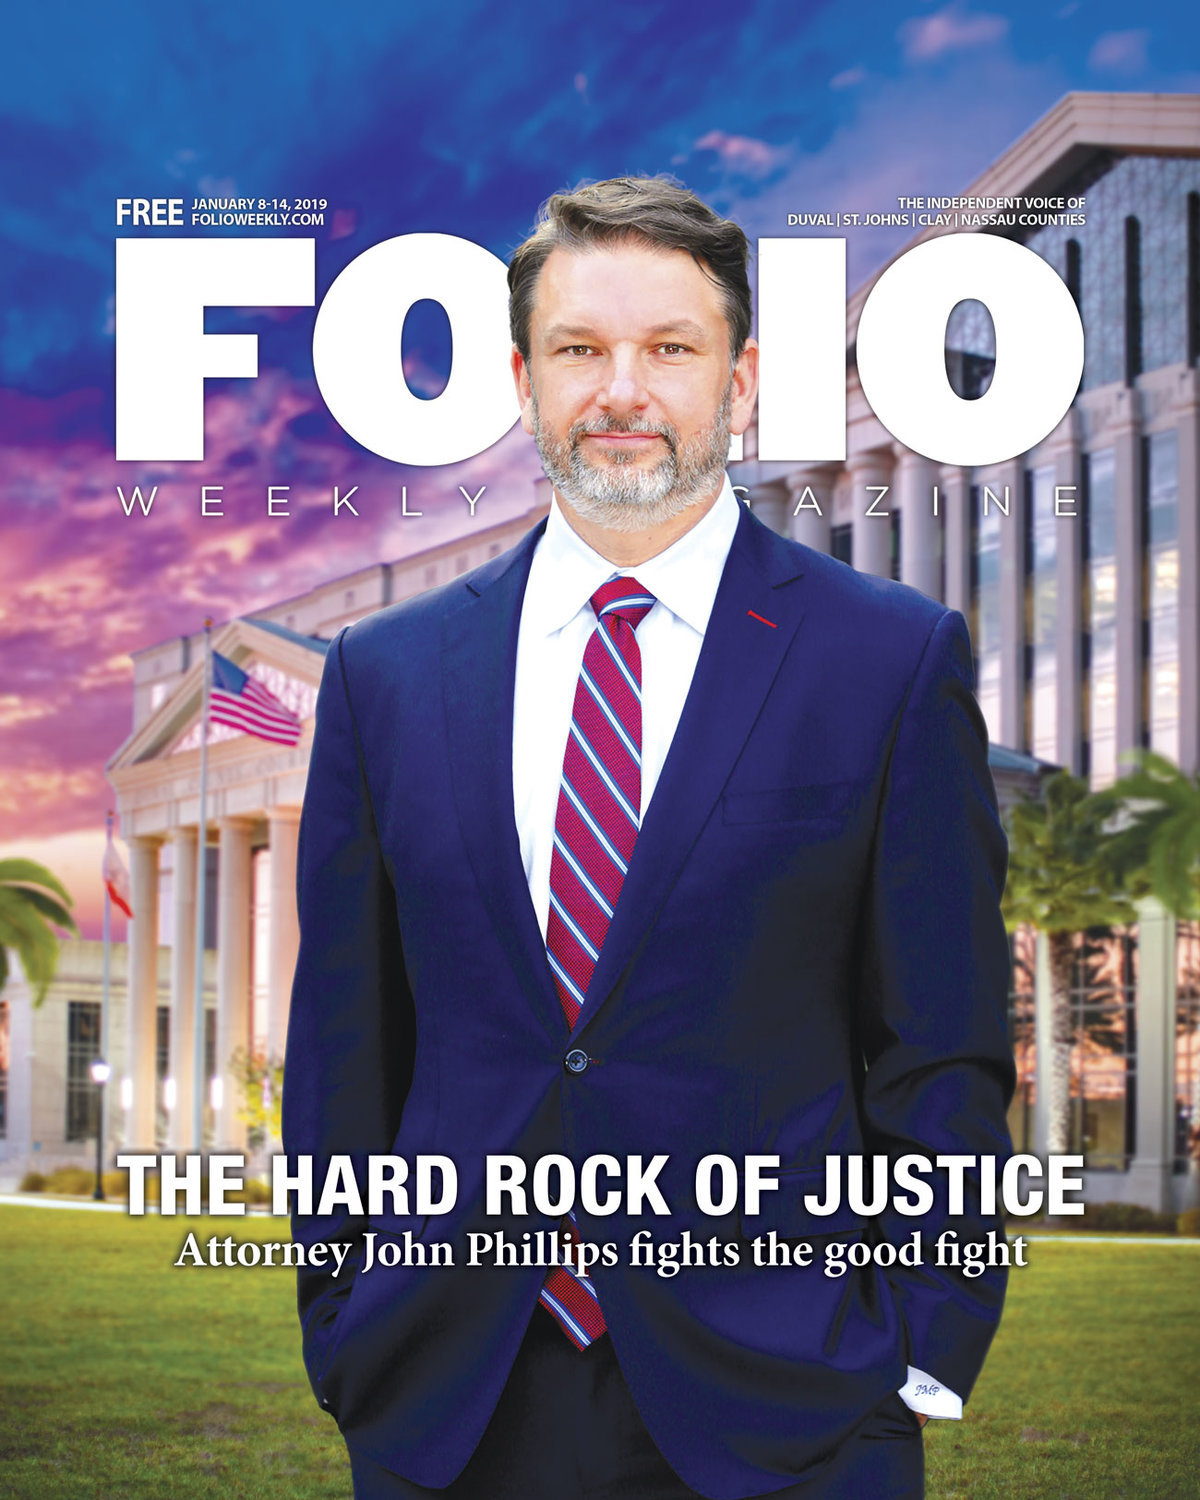 Folio Weekly profiled Jacksonville lawyer John Phillips in its Jan. 8-14, 2019, edition. Phillips said June 15 he and his partners bought the publication, which announced May 5 that it closed.